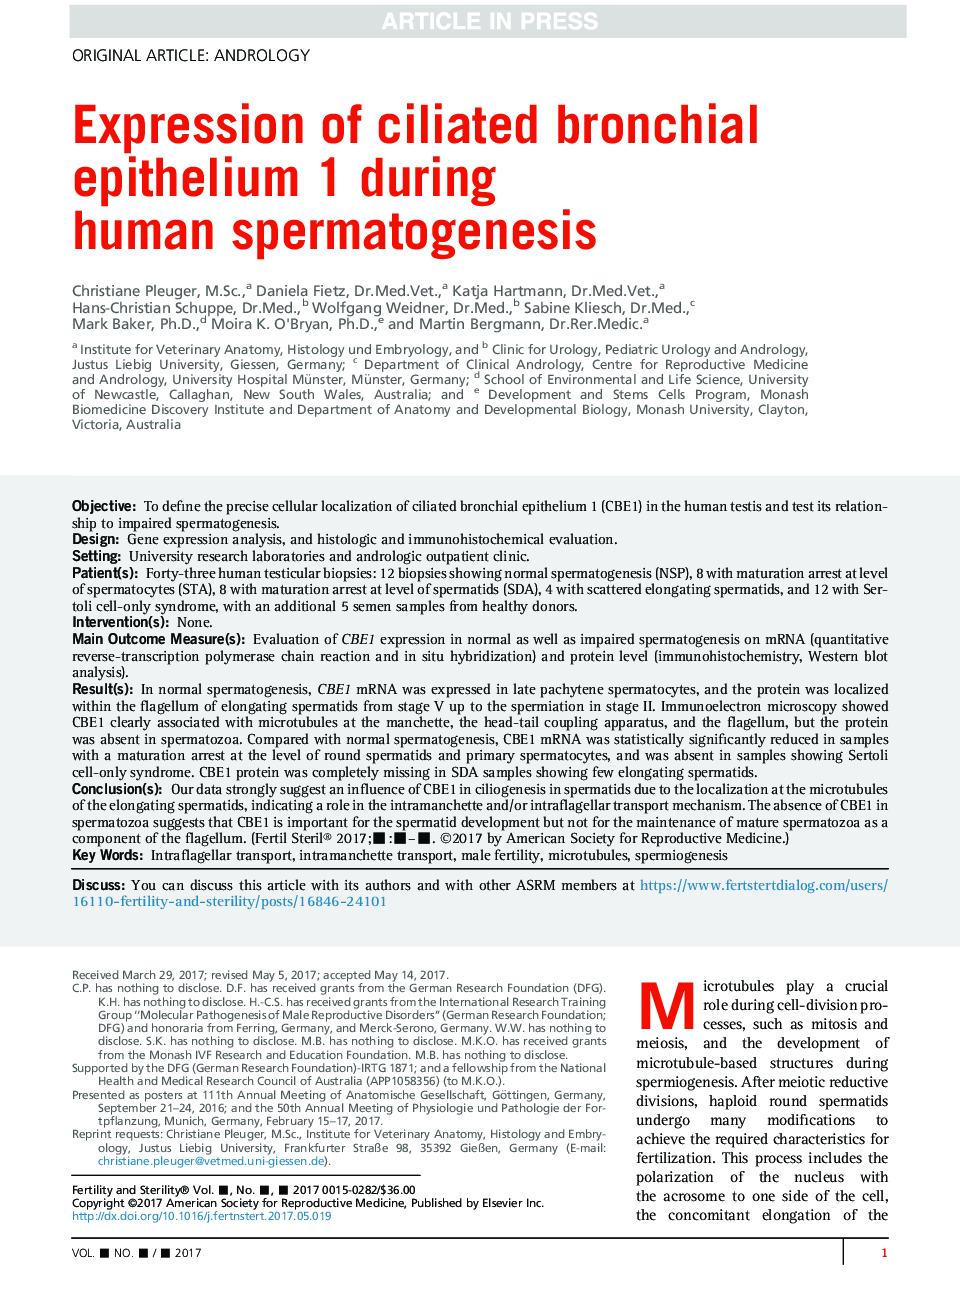 Expression of ciliated bronchial epithelium 1 during human spermatogenesis